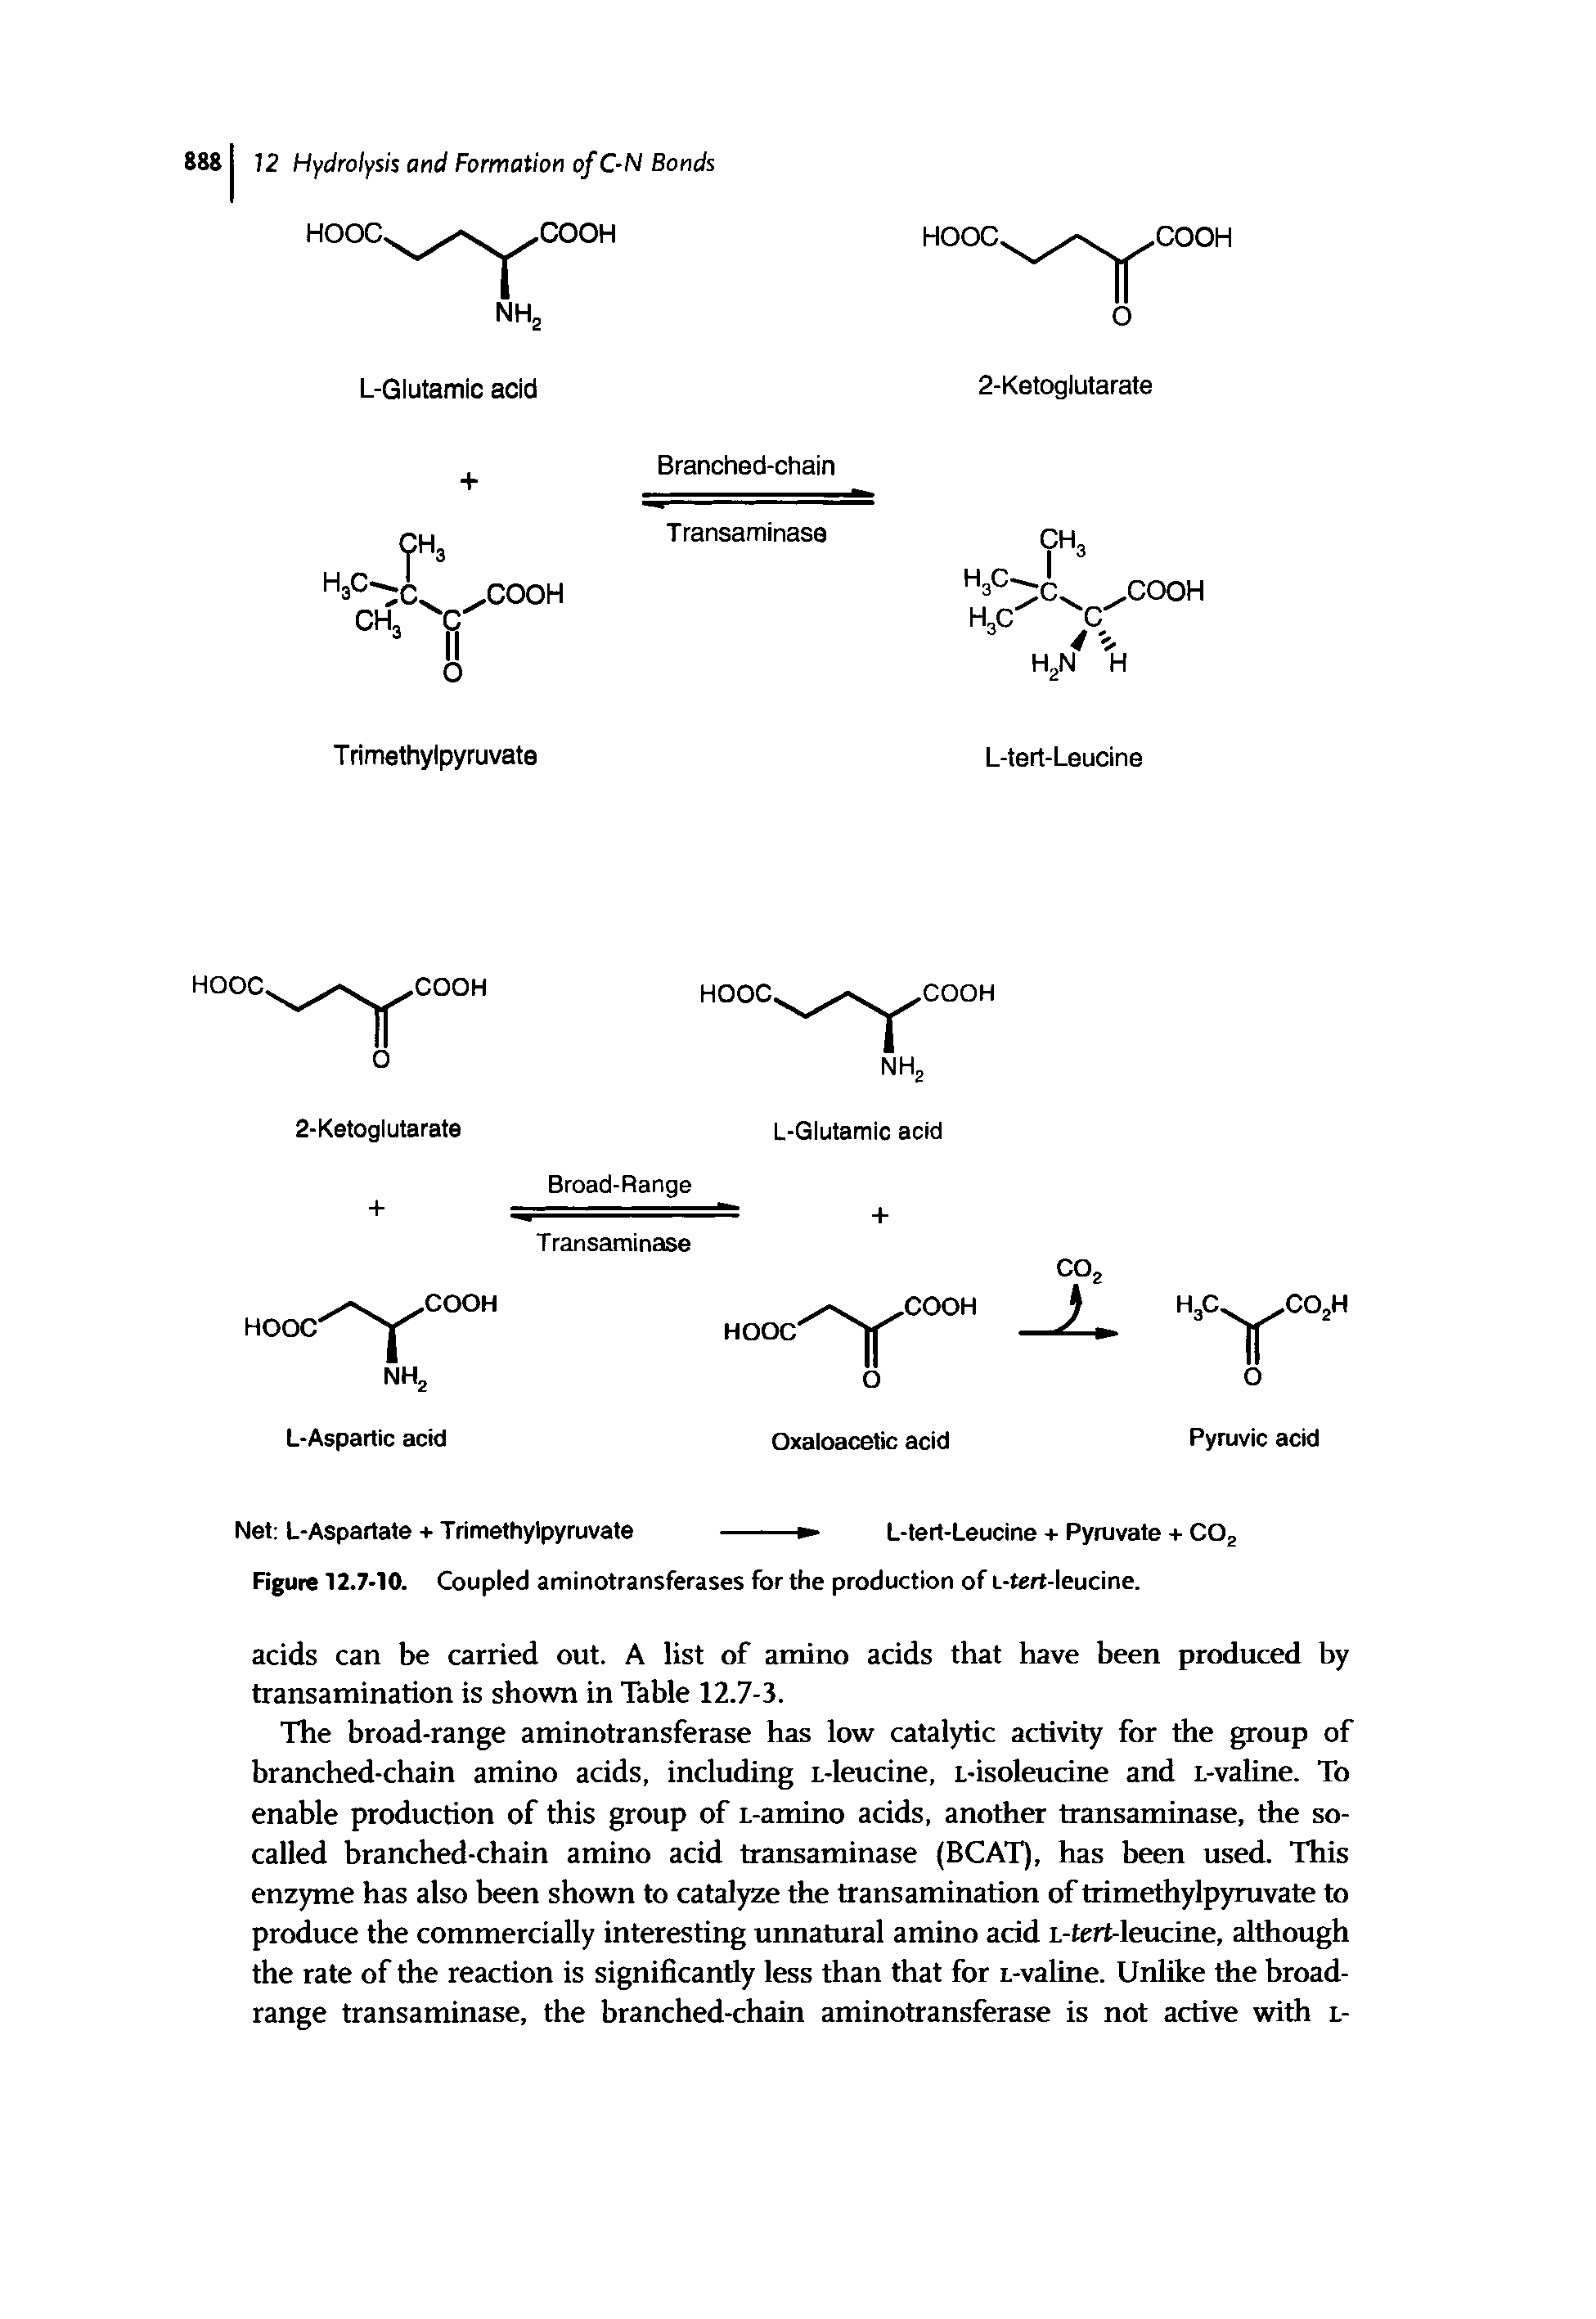 Figure 12.7-10. Coupled aminotransferases for the production of L-tert-leucine.